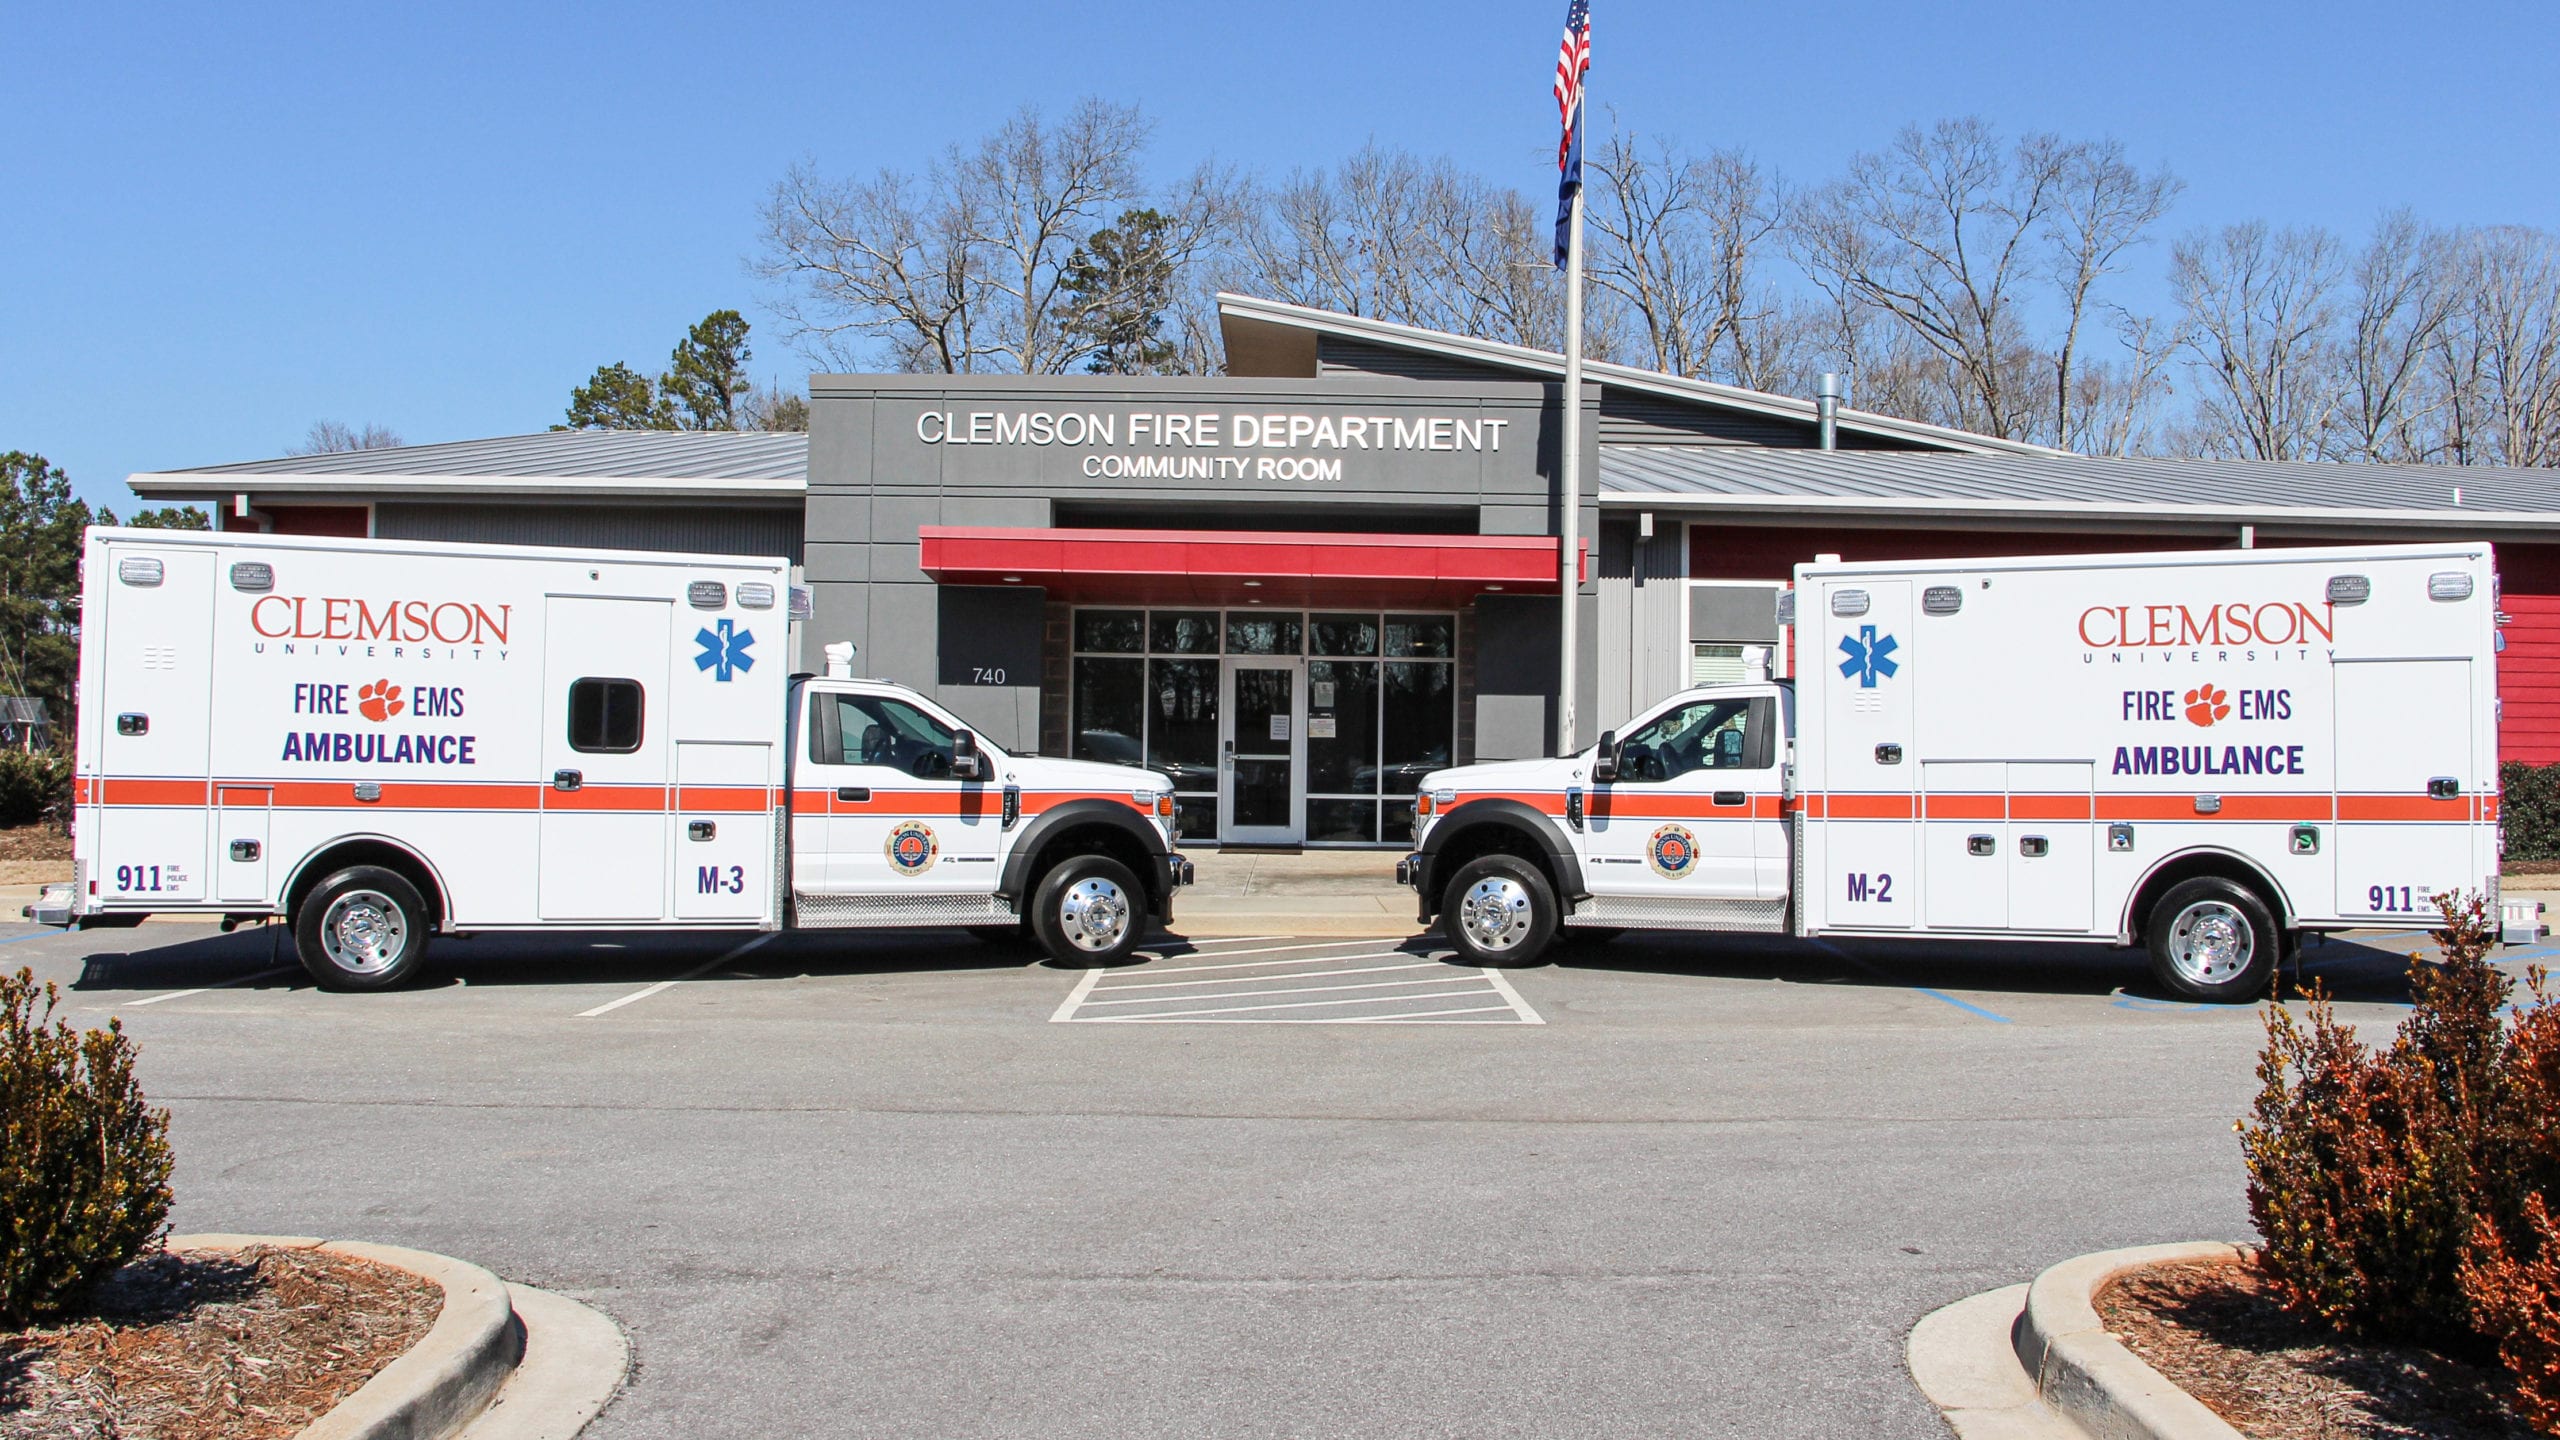 New ambulances will soon be added to the life-saving apparatus inventory for Clemson University Fire & EMS